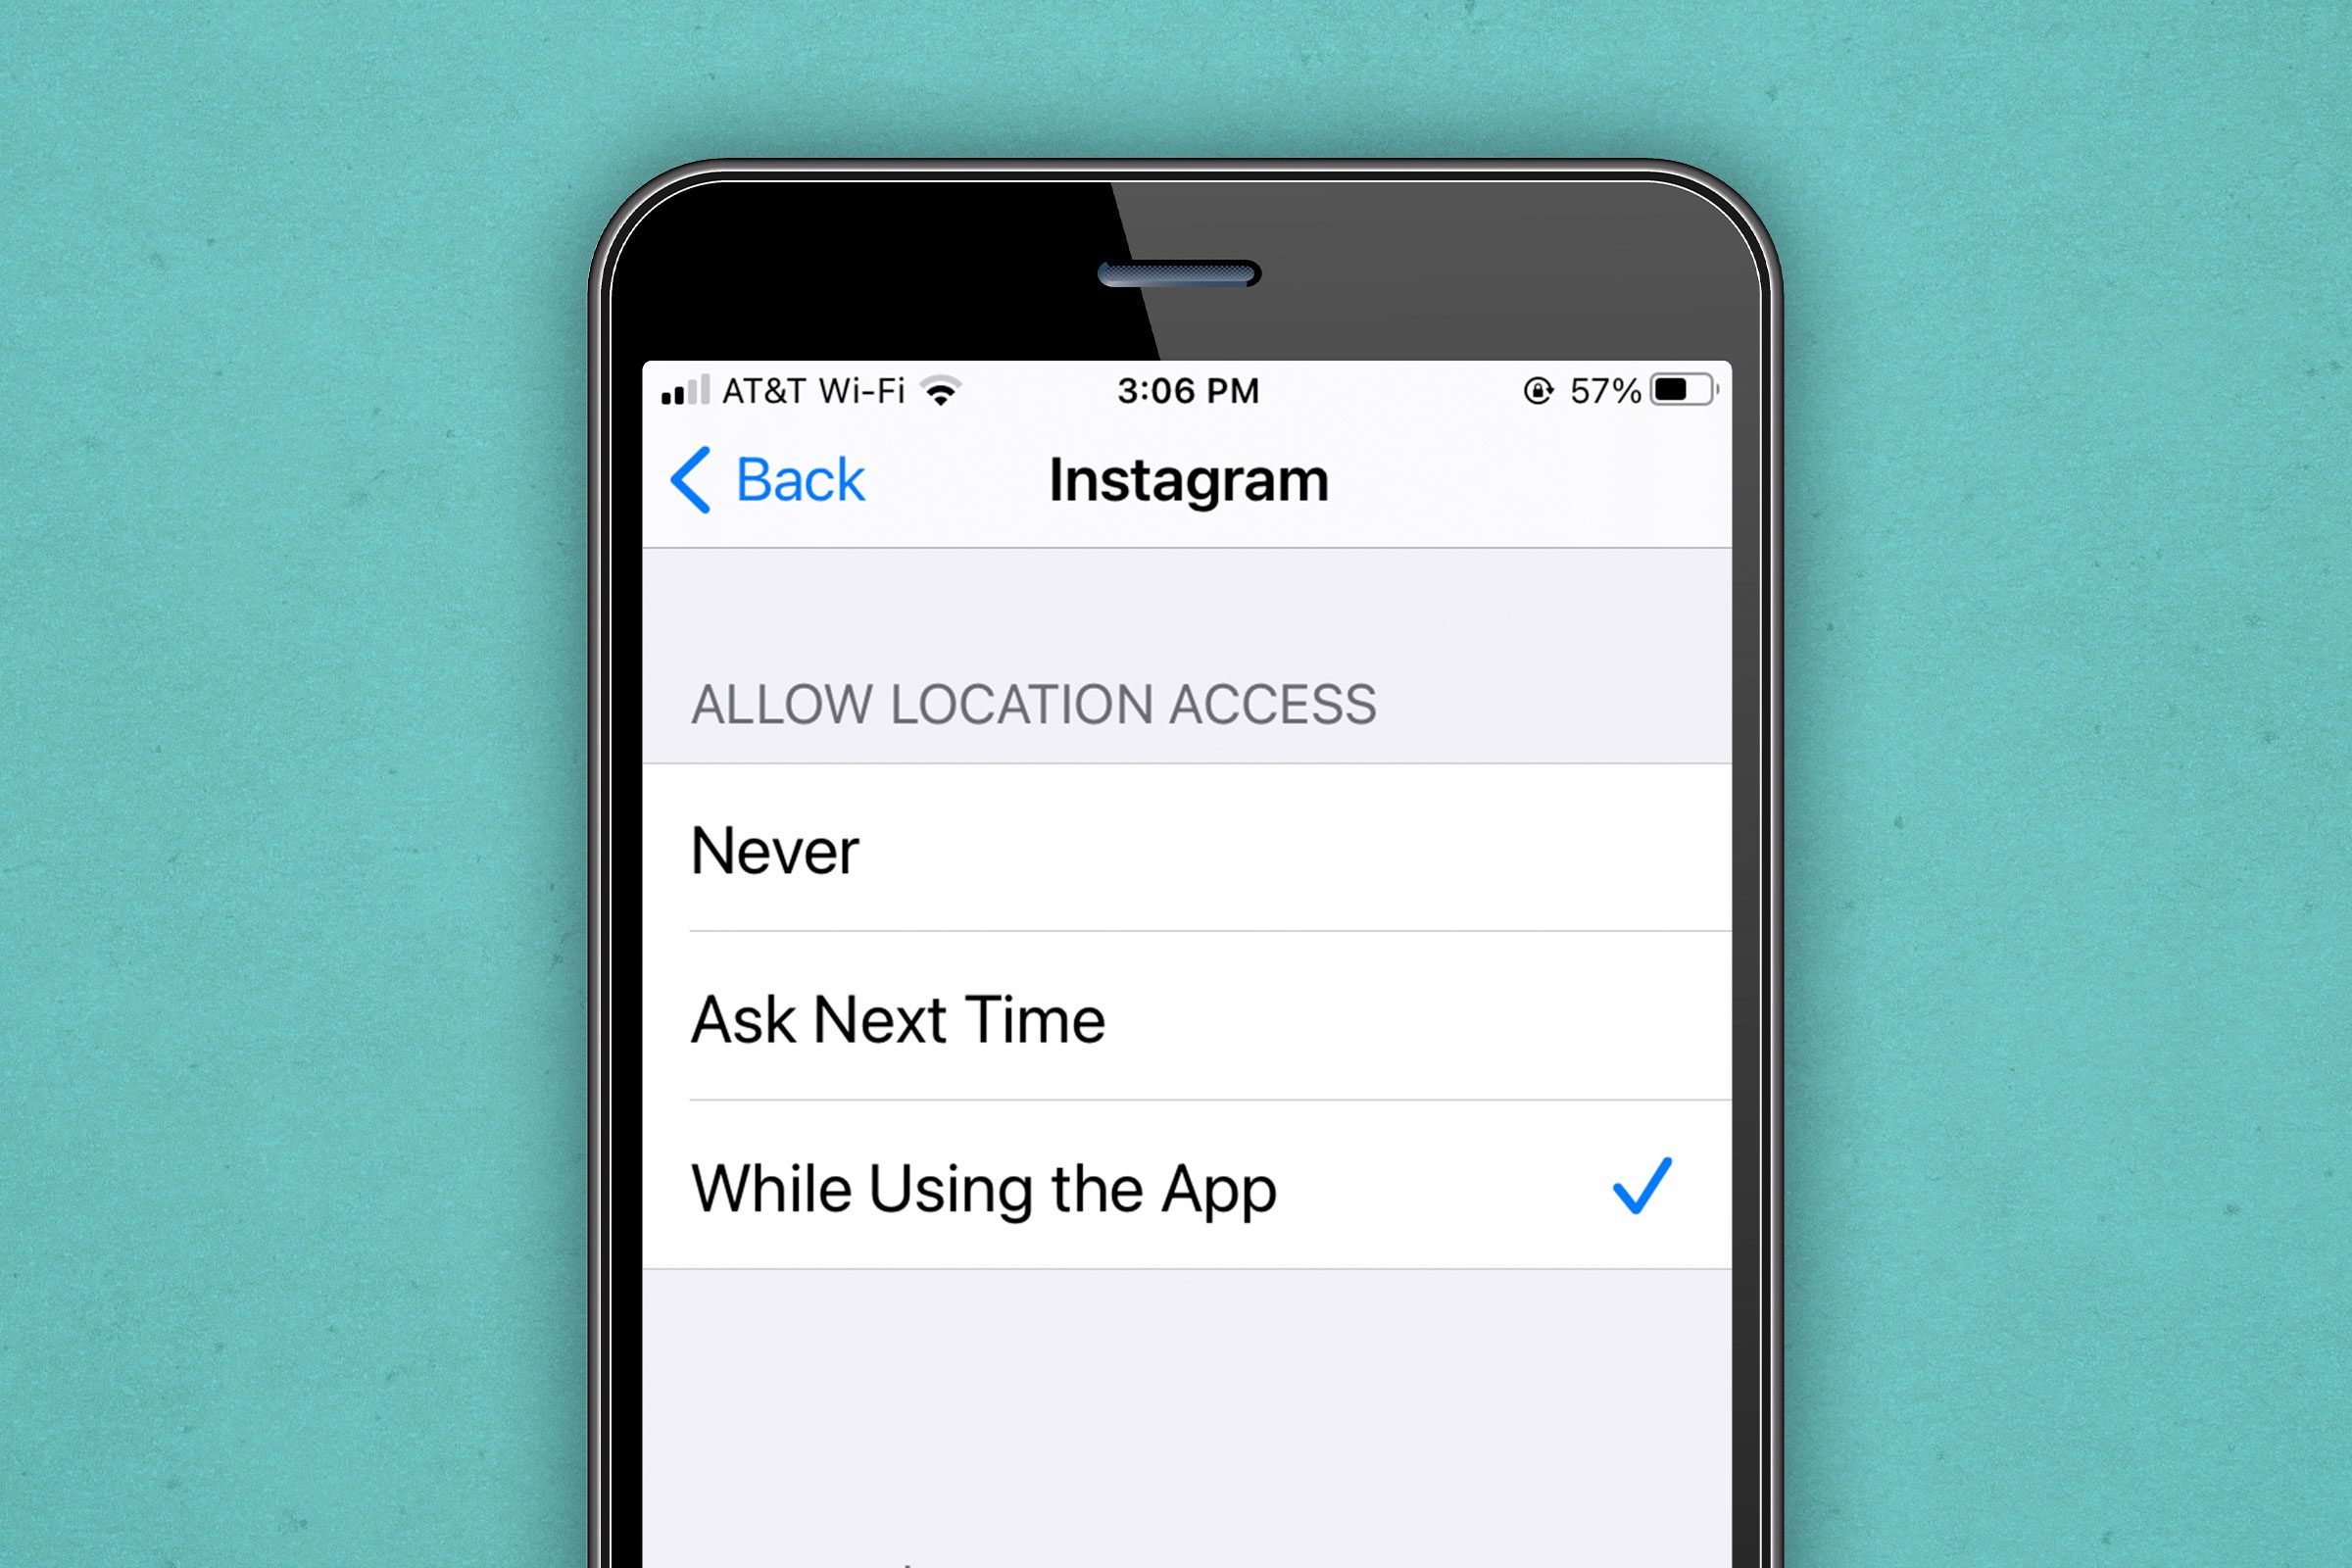 Location settings for a certain app